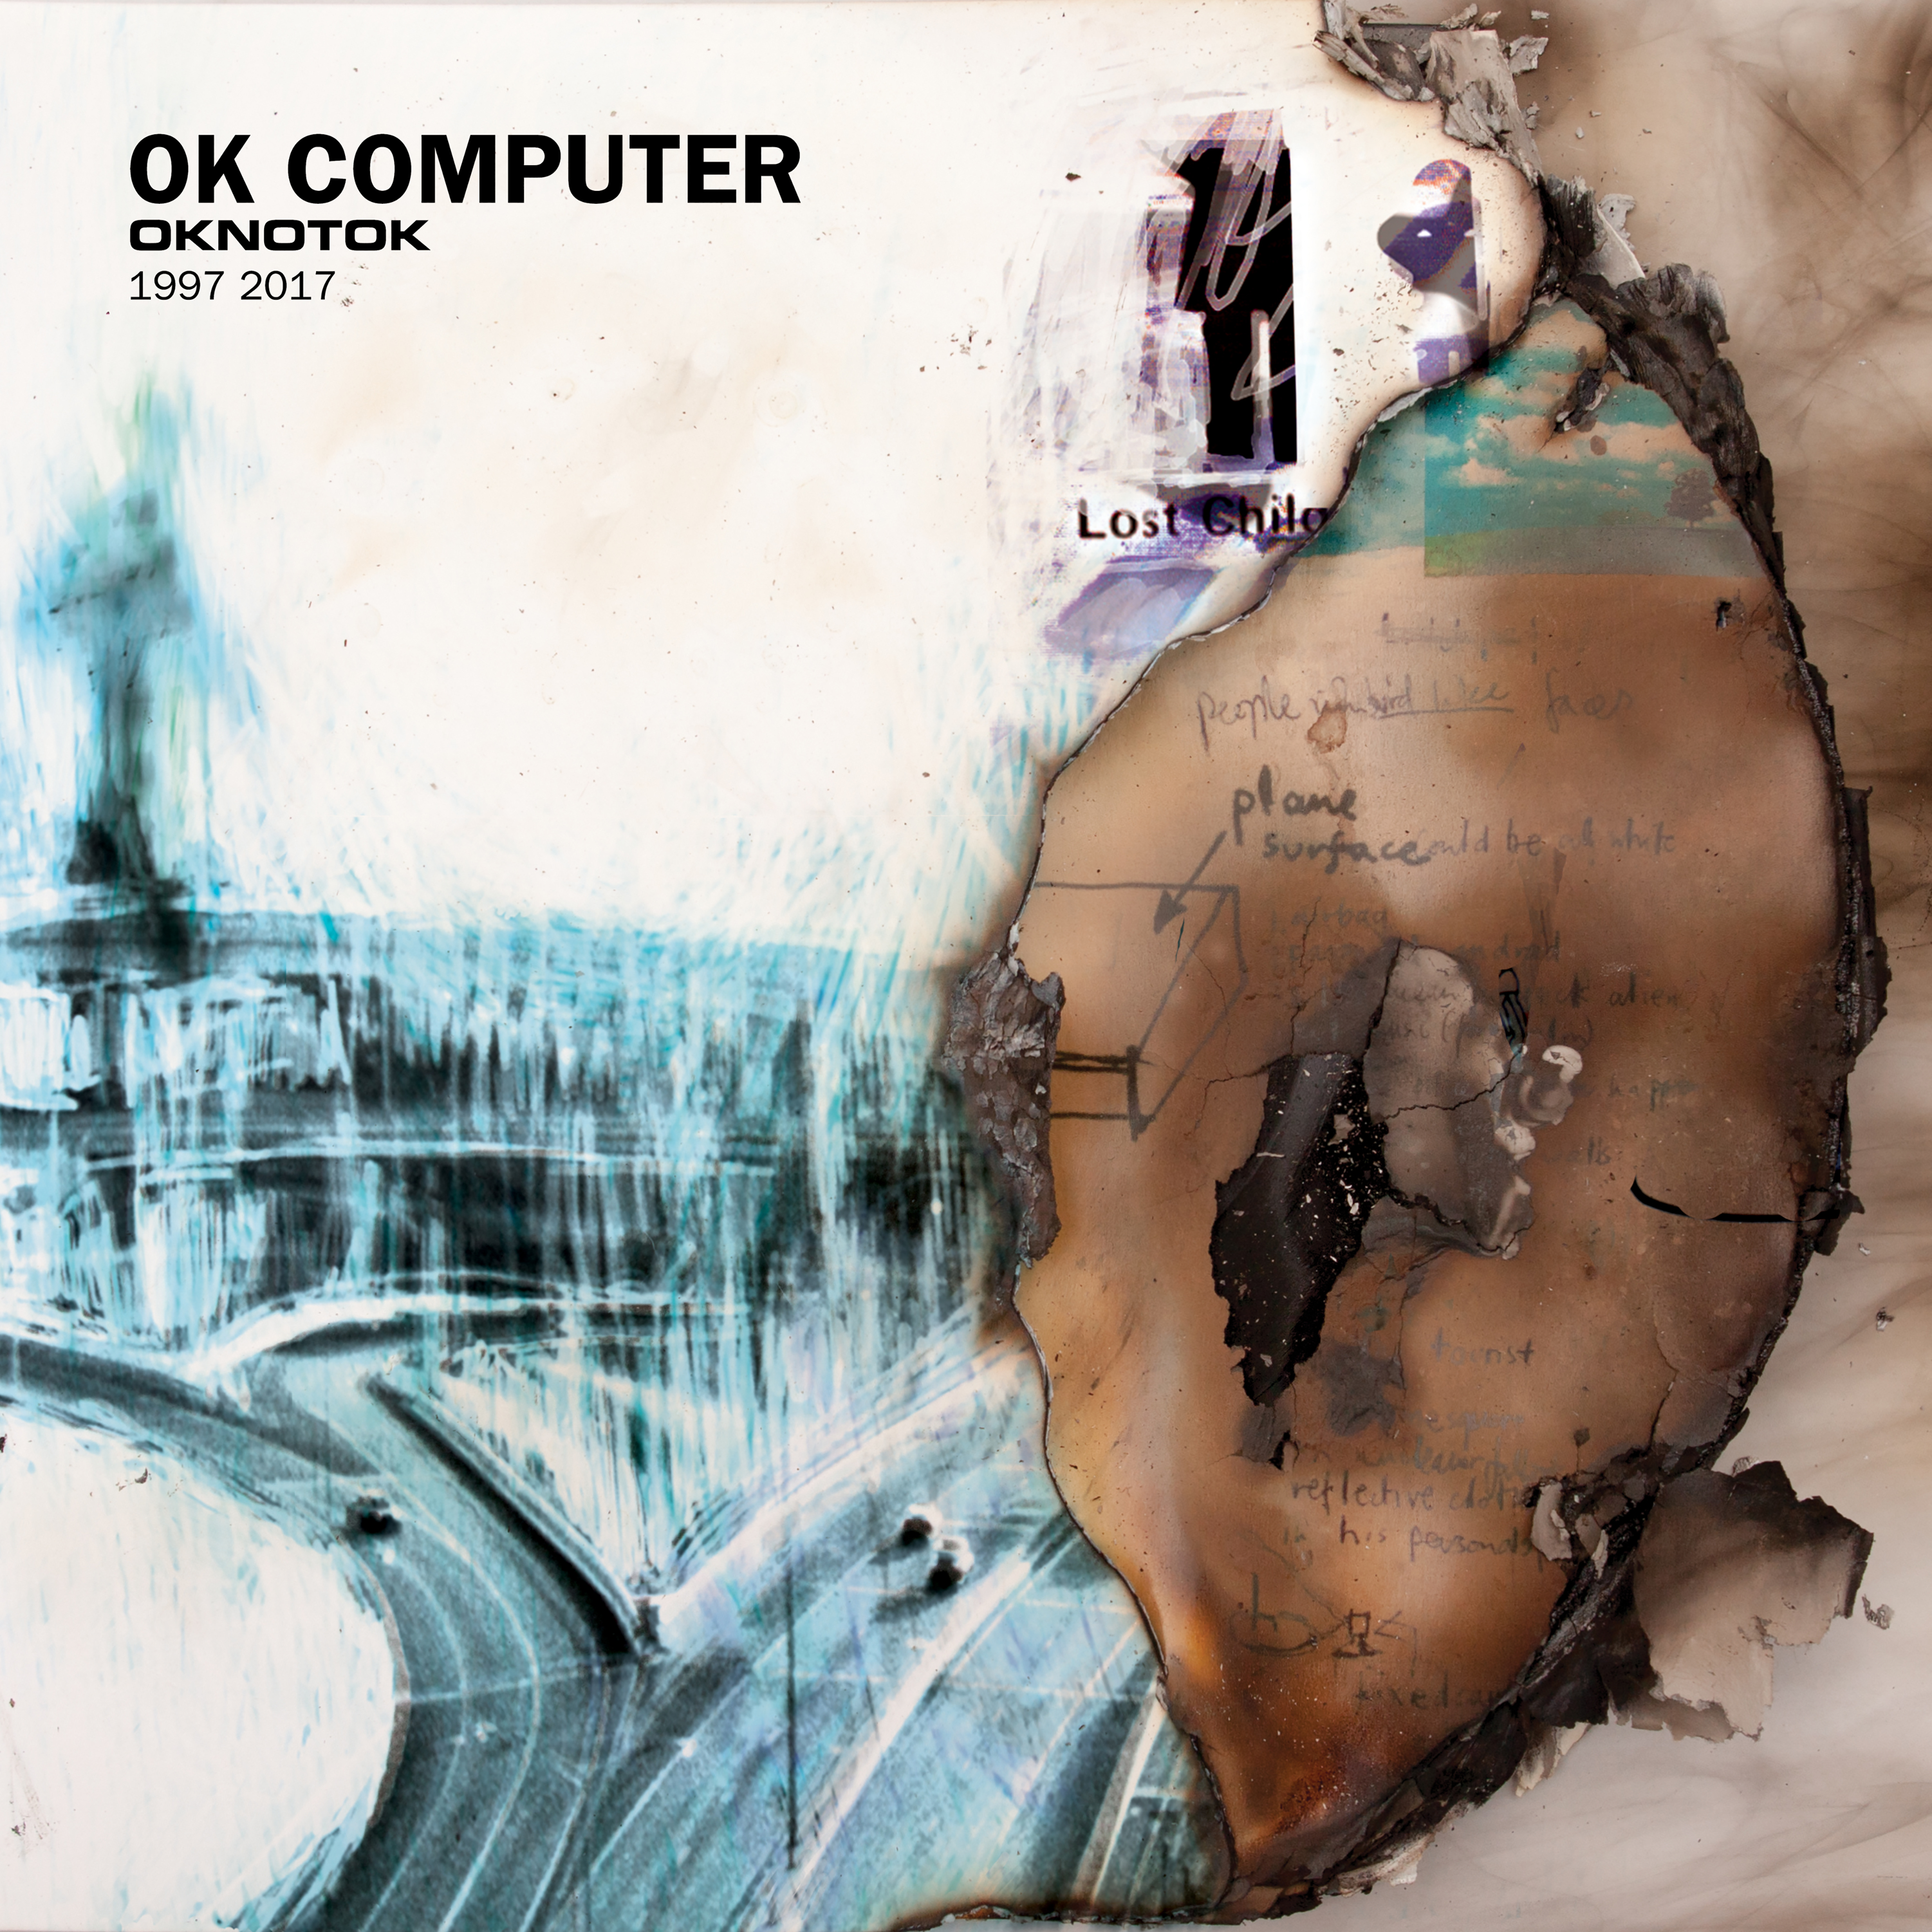 Radiohead release new song "I Promise". The track is one of 3 previously unreleased tracks to be featured on Radiohead's album 'OKNOTOK'.